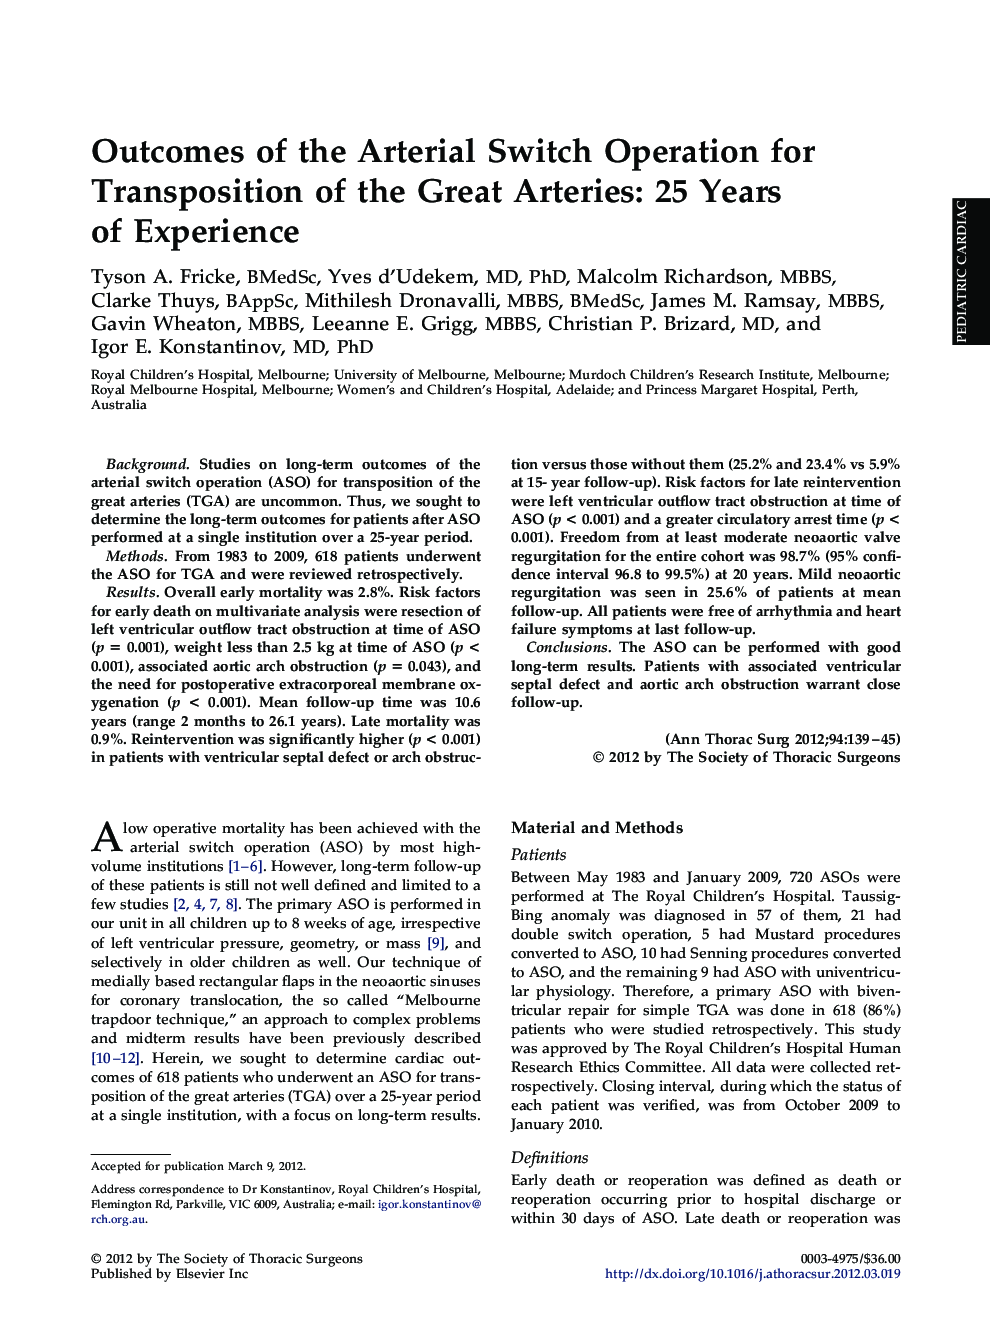 Outcomes of the Arterial Switch Operation for Transposition of the Great Arteries: 25 Years of Experience